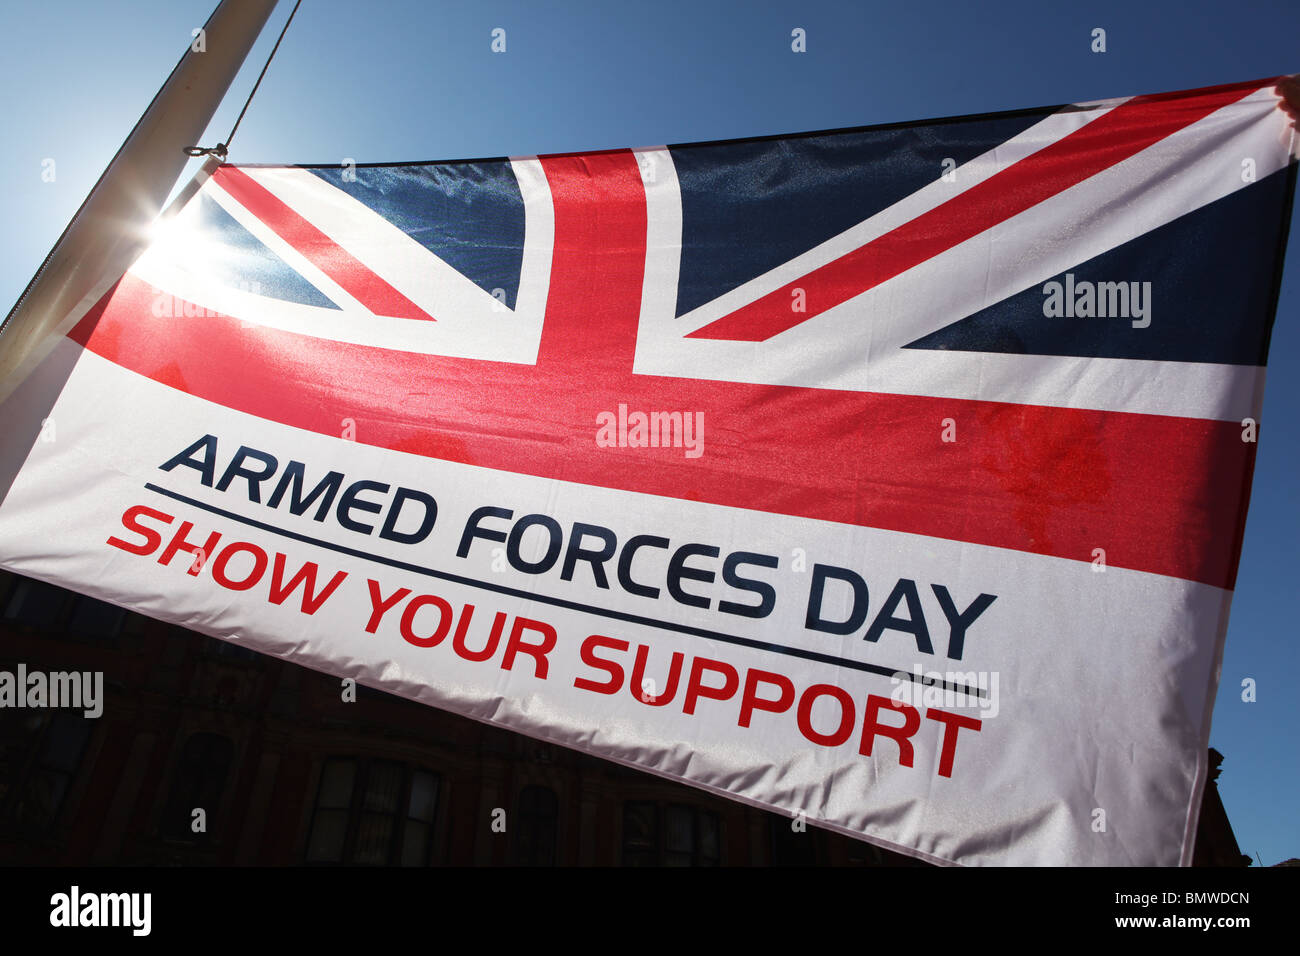 Armed Forces Day flag - Show your support for the troops Stock Photo